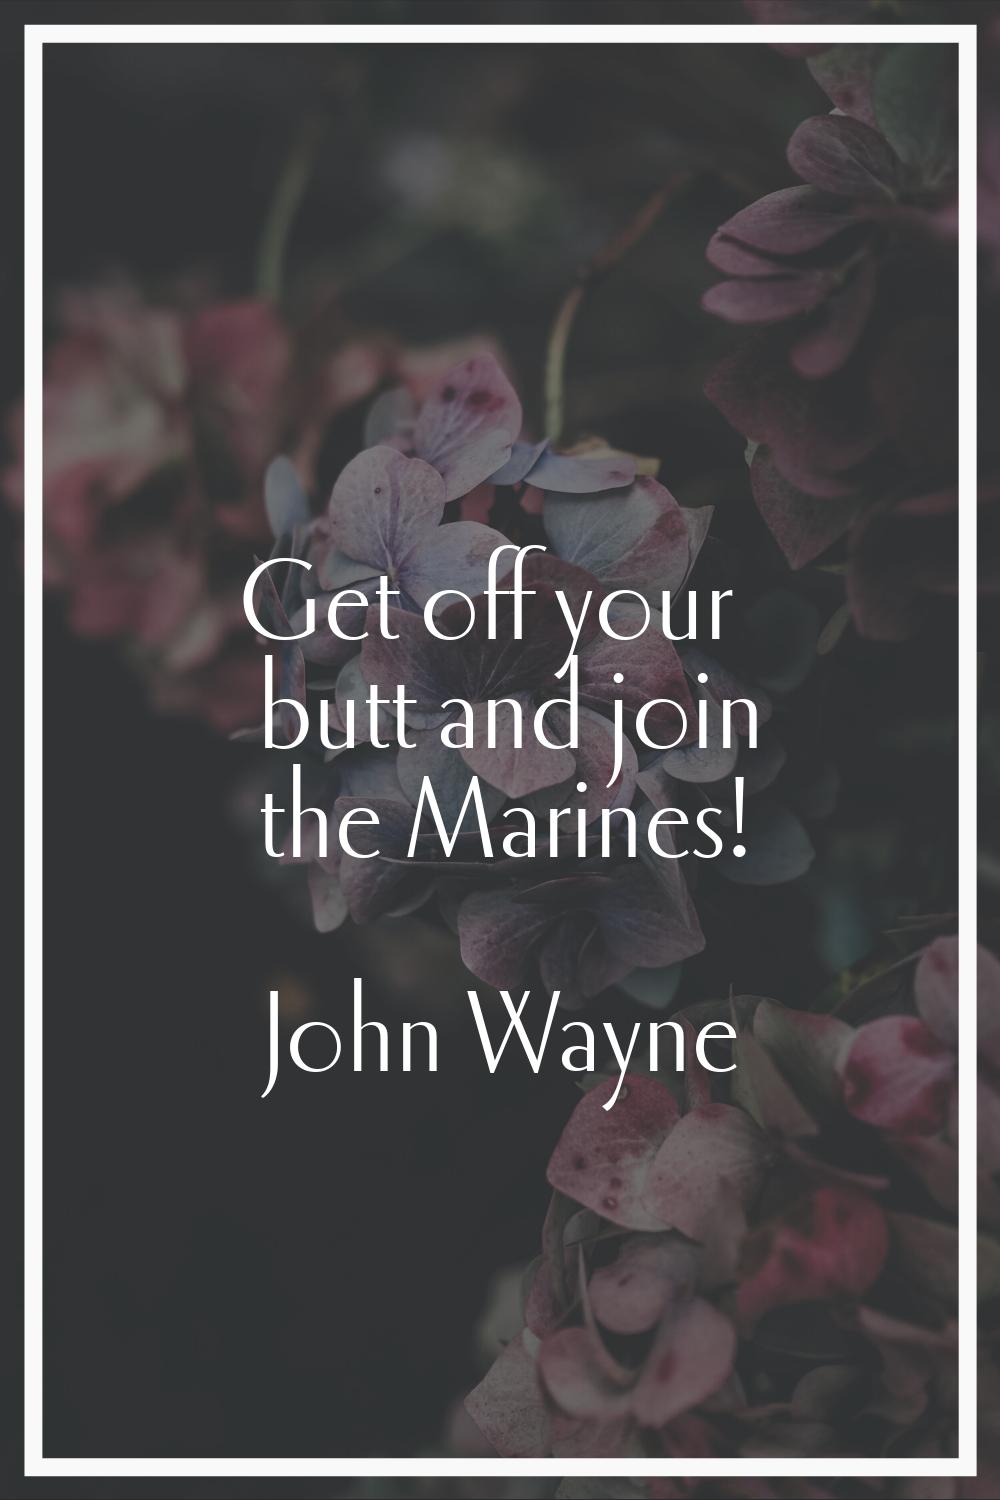 Get off your butt and join the Marines!